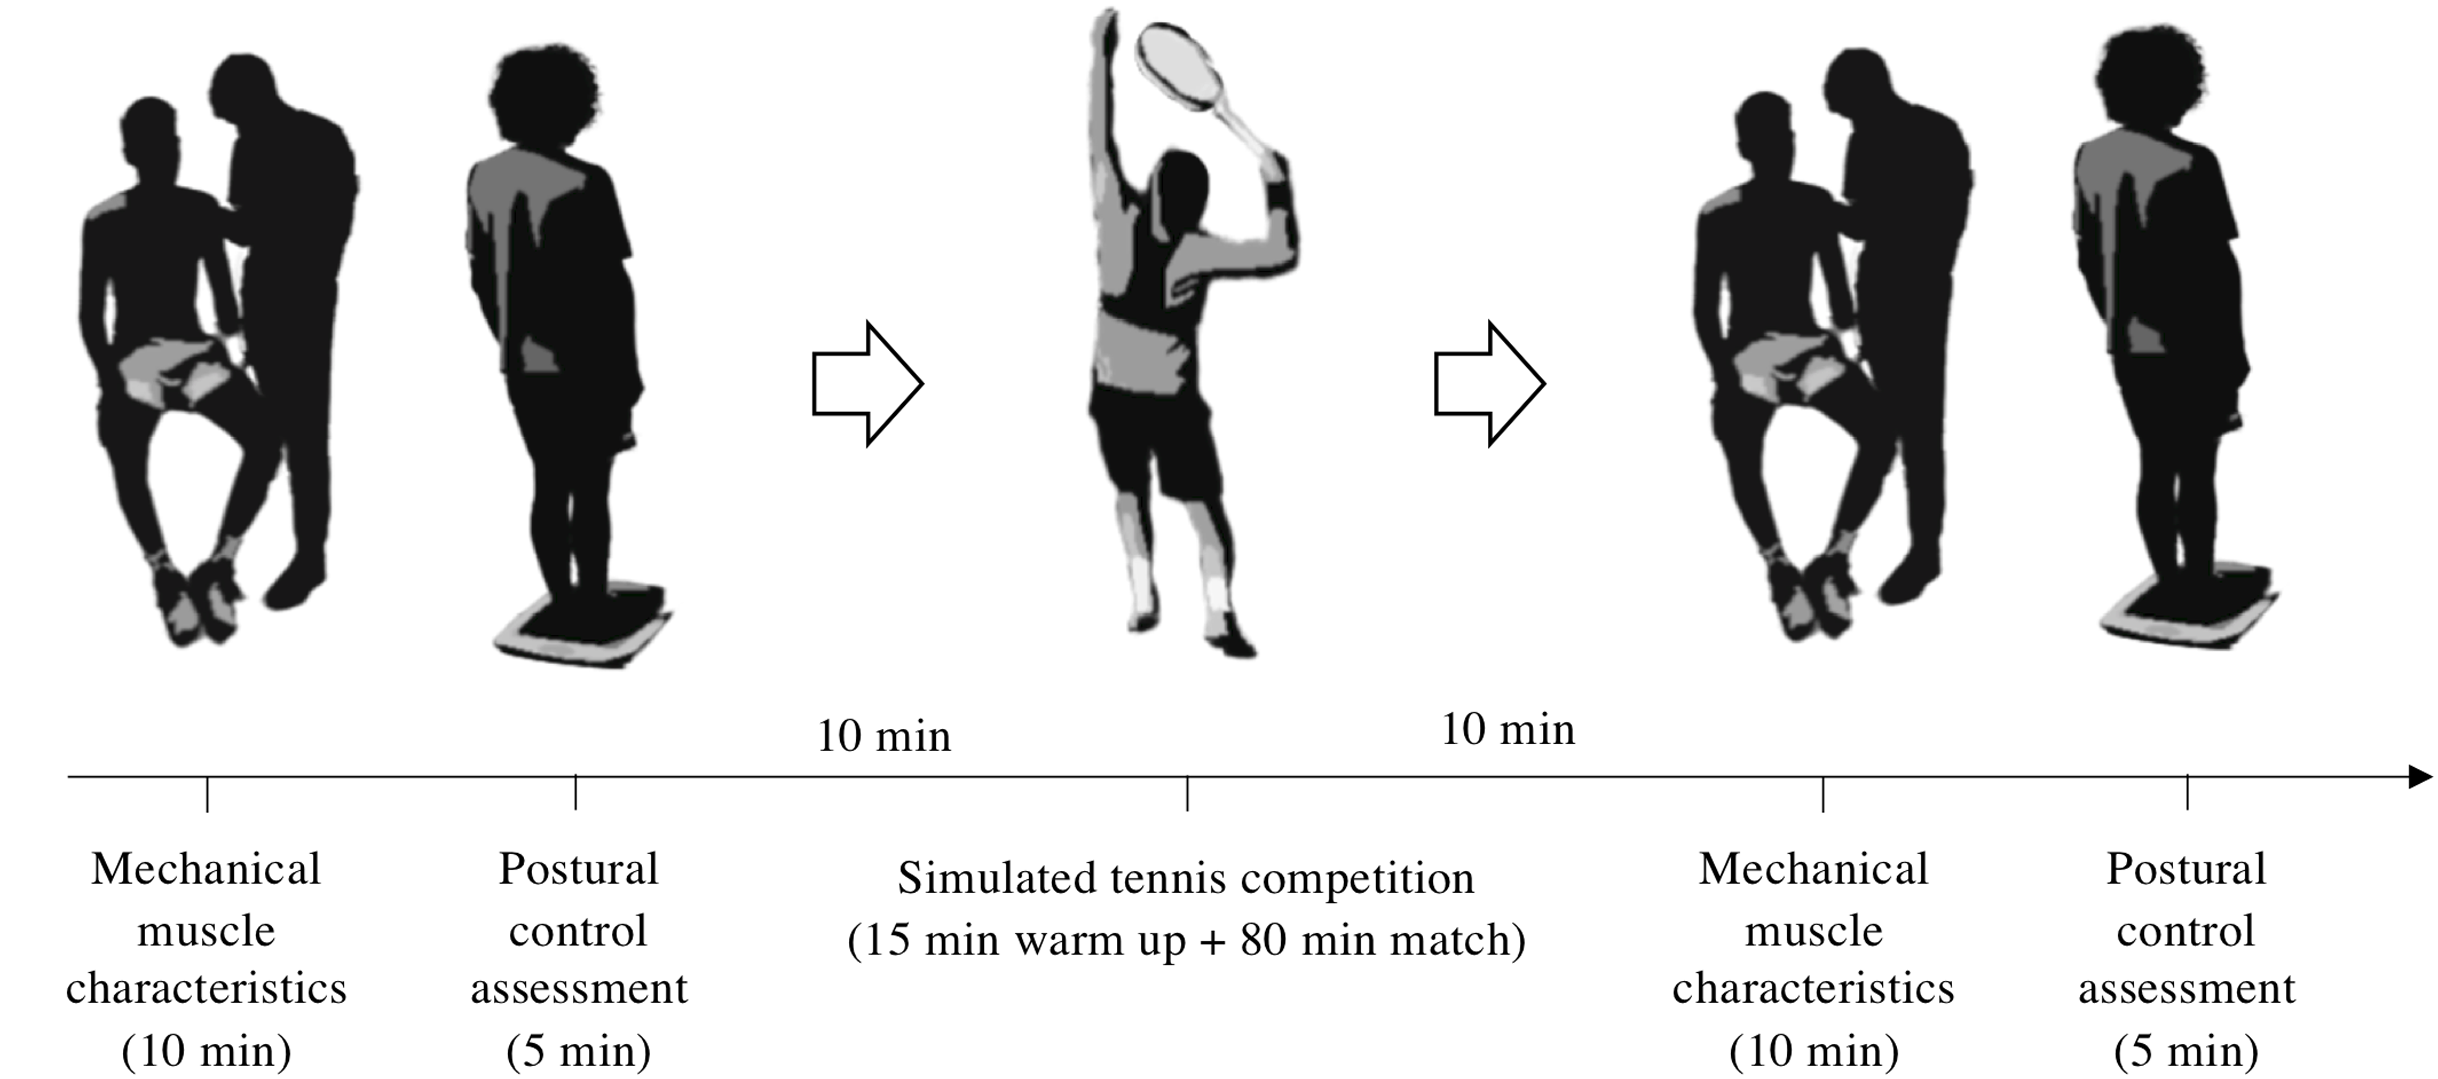 Alterations in mechanical muscle characteristics and postural control  induced by tennis match-play in young players [PeerJ]